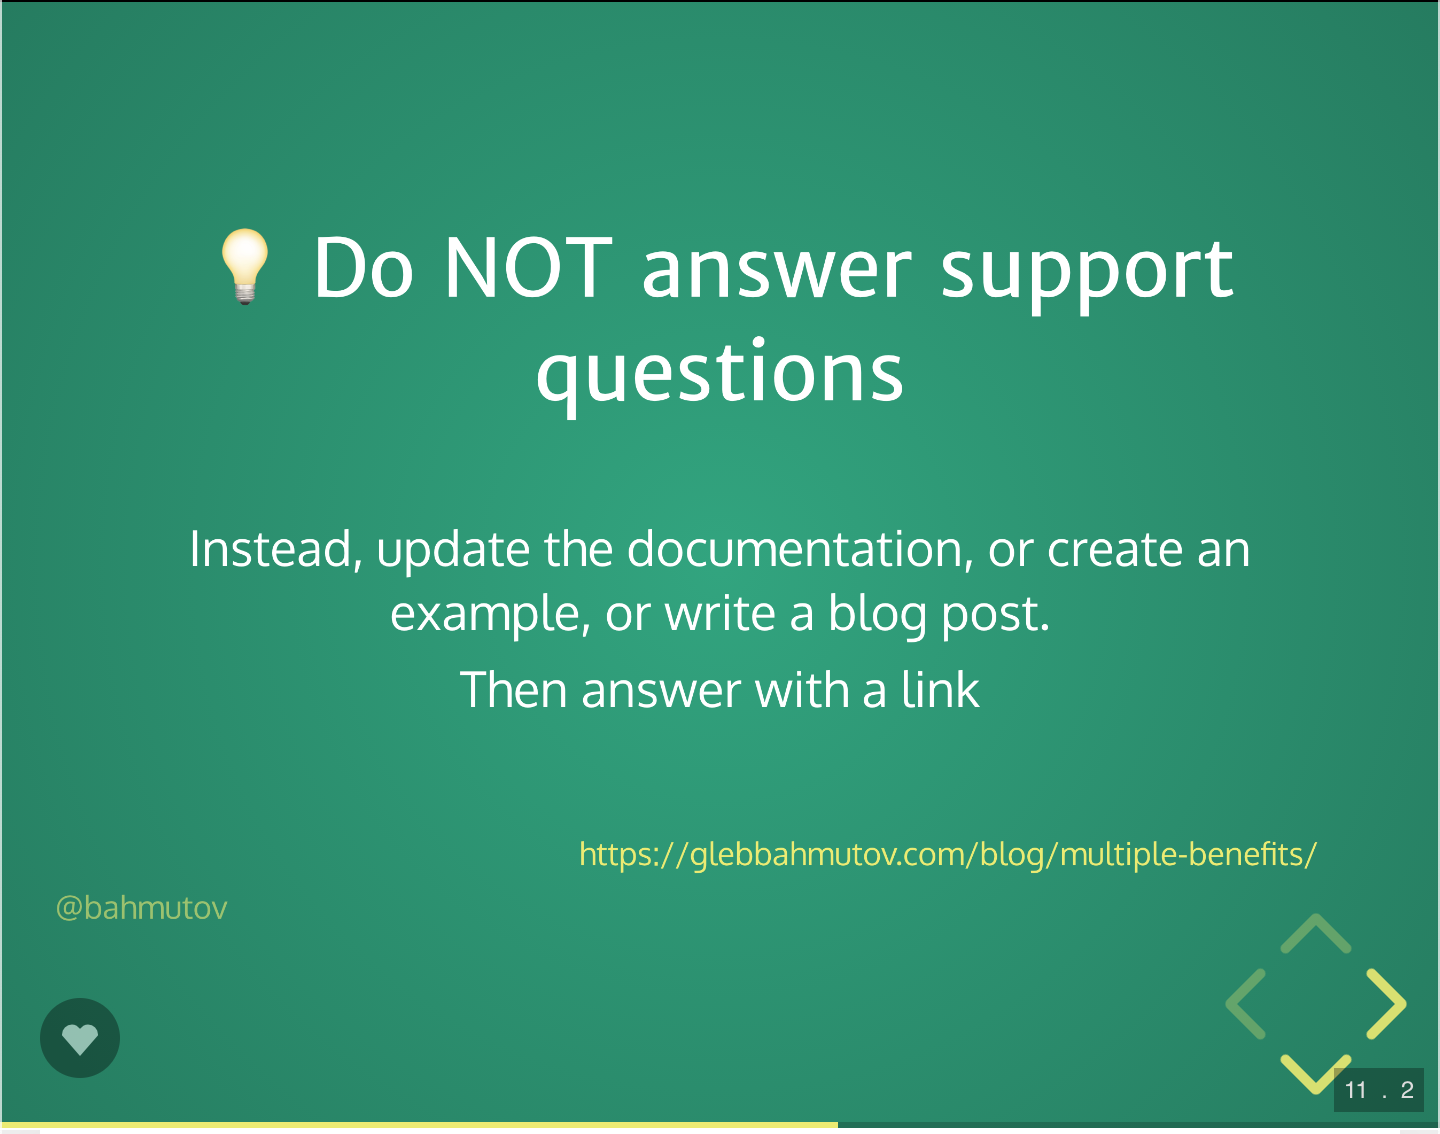 Answer the user question with the link